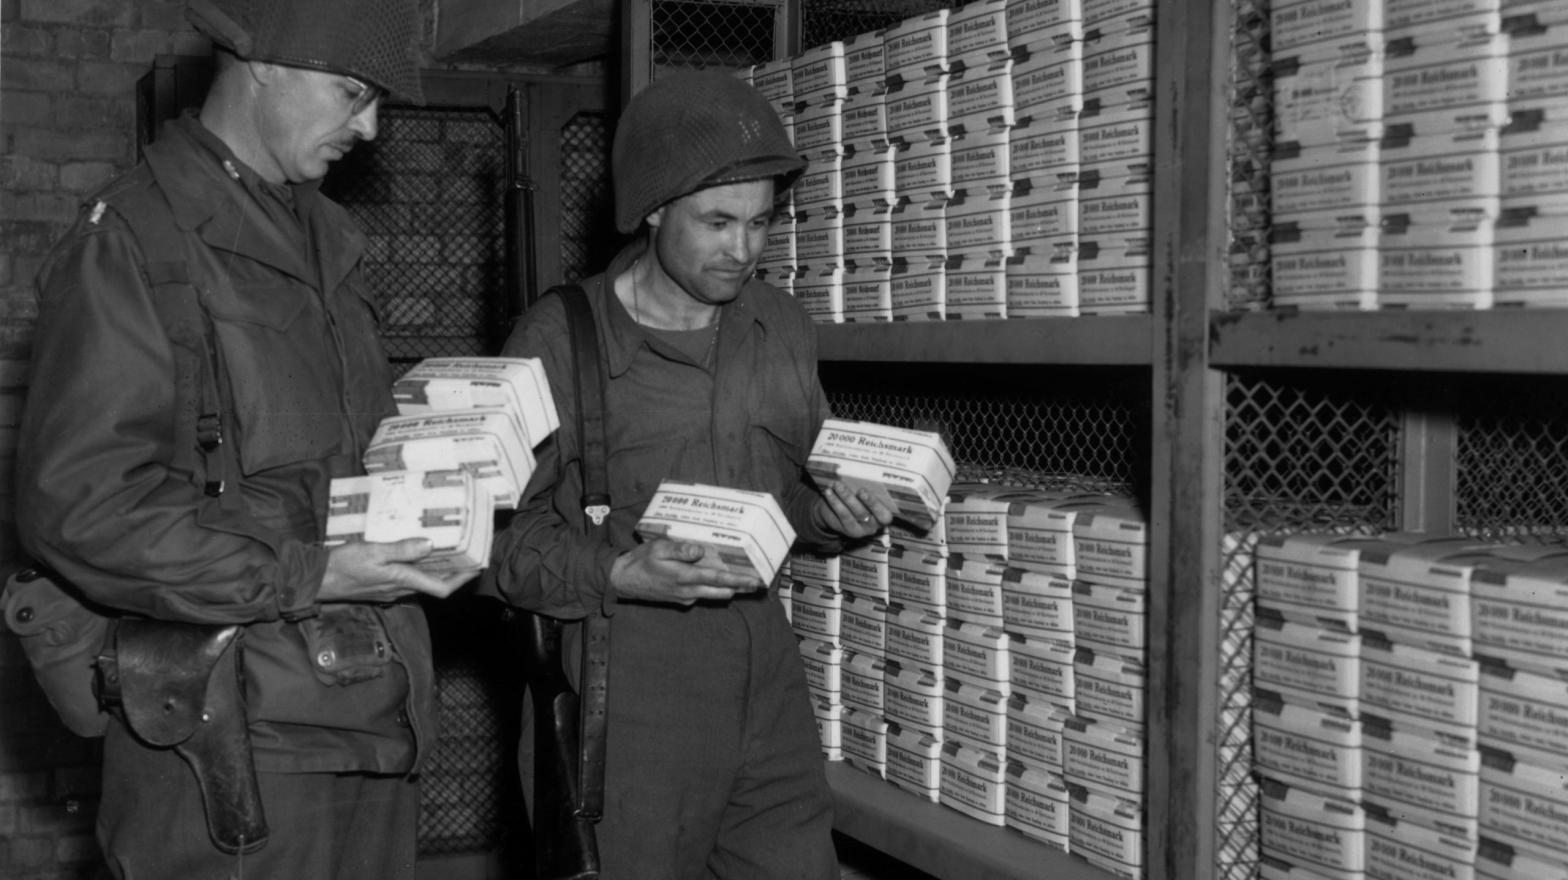 U.S. soldiers Lieutenant Colonel Ben T. Ammons (left) and Captain Virgil Happy in a bank in Magdeburg, Germany, where soldiers discovered 280 million dollars in Reichsmark notes on April 27, 1945. (Photo: Fred Ramage/Keystone, Getty Images)